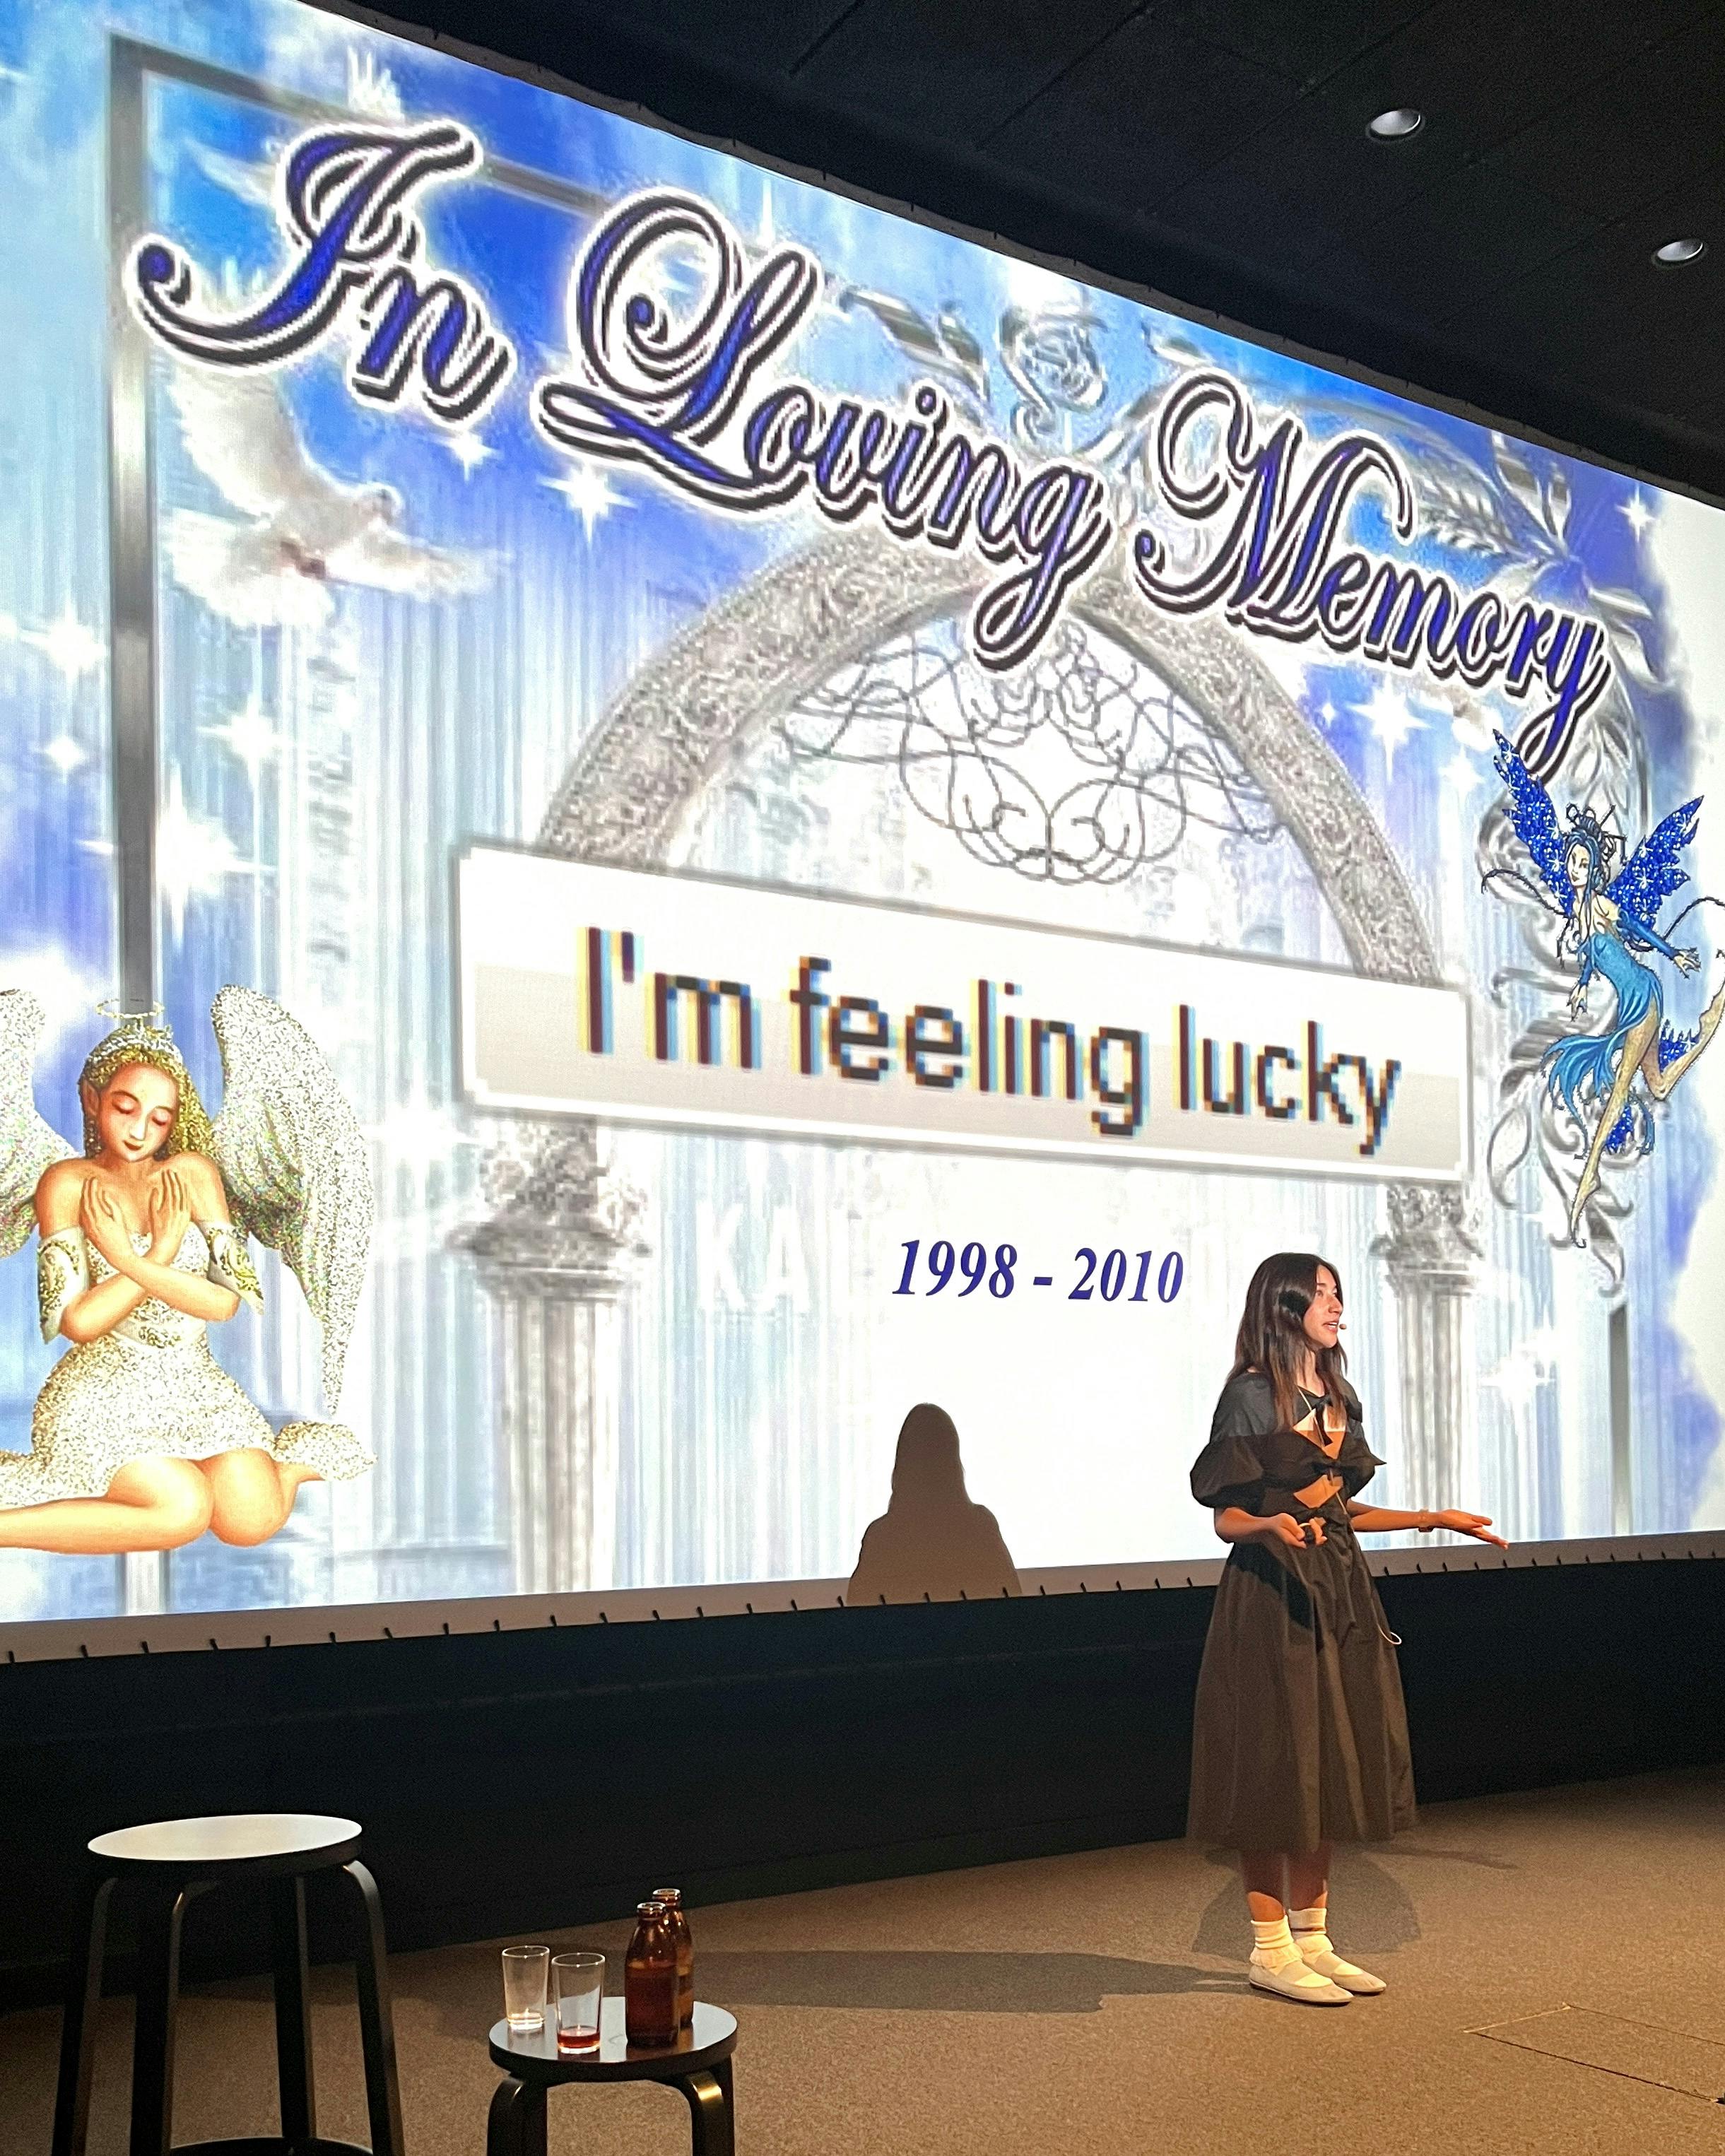 Maya giving the eulogy at Naive Yearly. [Maya stands before a giant screen that reads “In Loving Memory: I’m feeling lucky 1998-2010” with heavenly blue background, angels, doves, and a shimmering archway.]